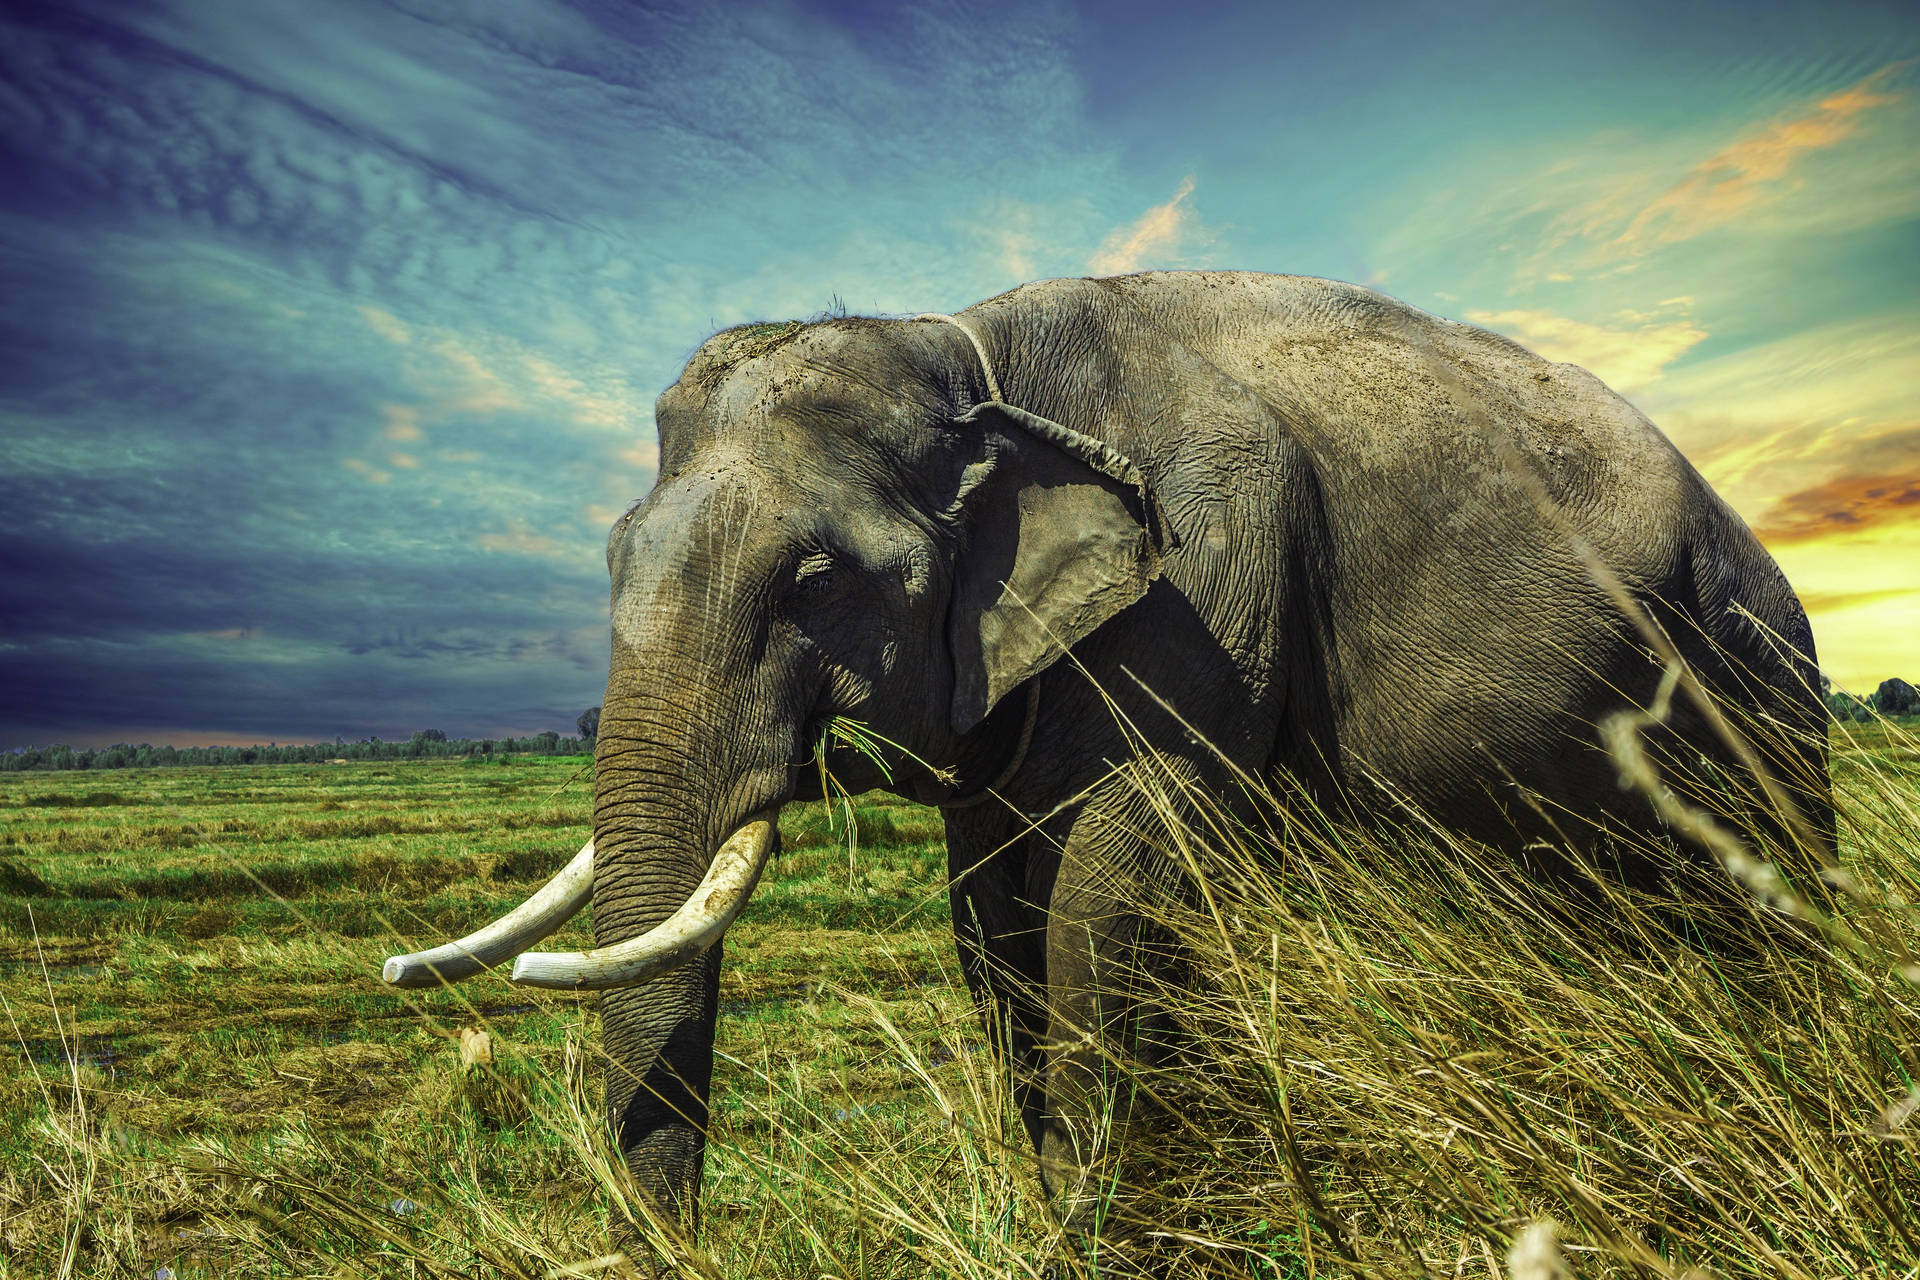 A majestic elephant standing out against a field of tall grass Wallpaper